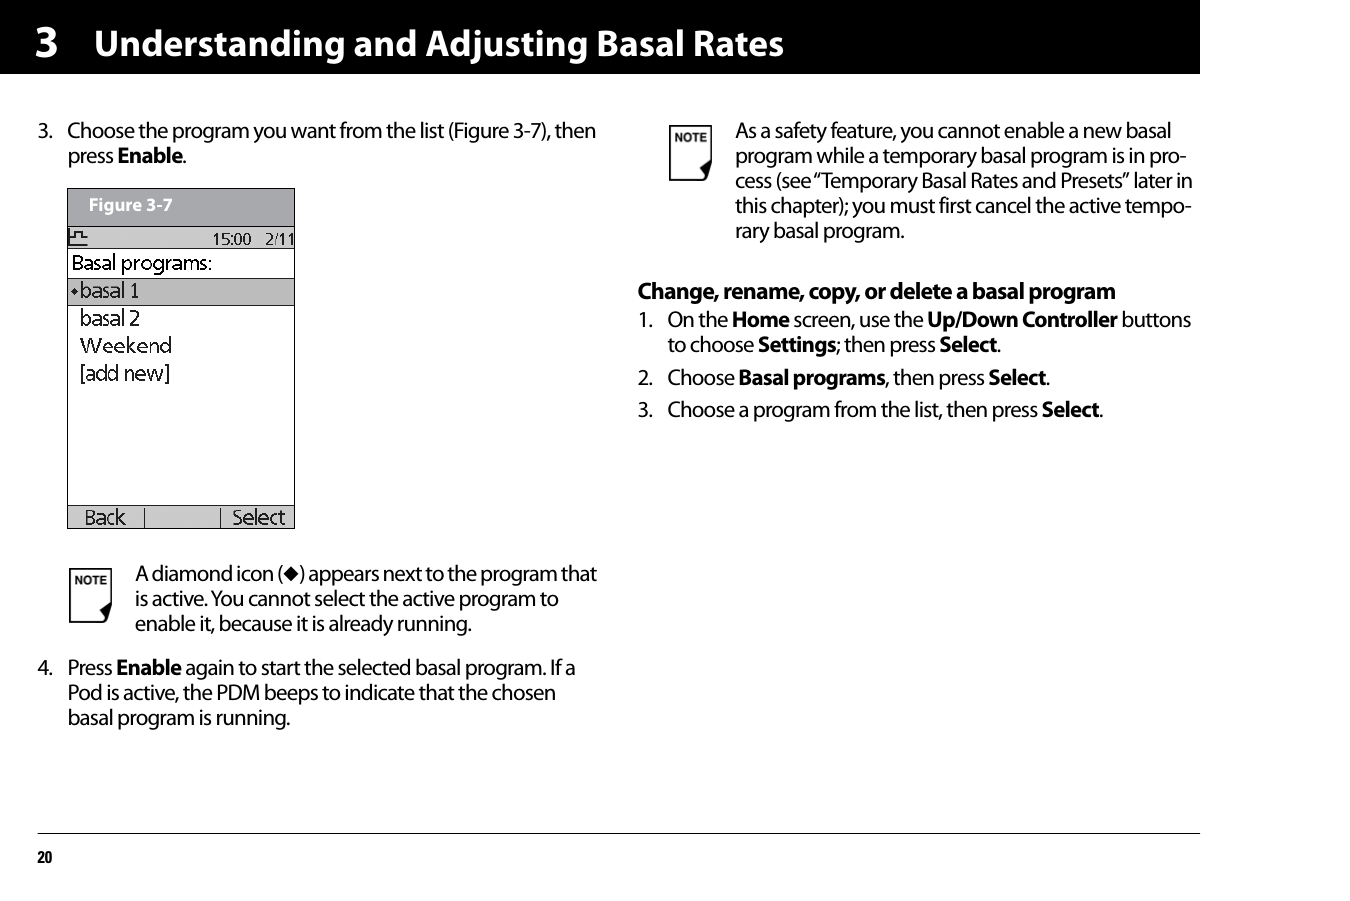 Understanding and Adjusting Basal Rates2033. Choose the program you want from the list (Figure 3-7), then press Enable.   4. Press Enable again to start the selected basal program. If a Pod is active, the PDM beeps to indicate that the chosen basal program is running.  Change, rename, copy, or delete a basal program1. On the Home screen, use the Up/Down Controller buttons to choose Settings; then press Select.2. Choose Basal programs, then press Select.3. Choose a program from the list, then press Select.A diamond icon (u) appears next to the program that is active. You cannot select the active program to enable it, because it is already running.Figure 3-7As a safety feature, you cannot enable a new basal program while a temporary basal program is in pro-cess (see “Temporary Basal Rates and Presets” later in this chapter); you must first cancel the active tempo-rary basal program.